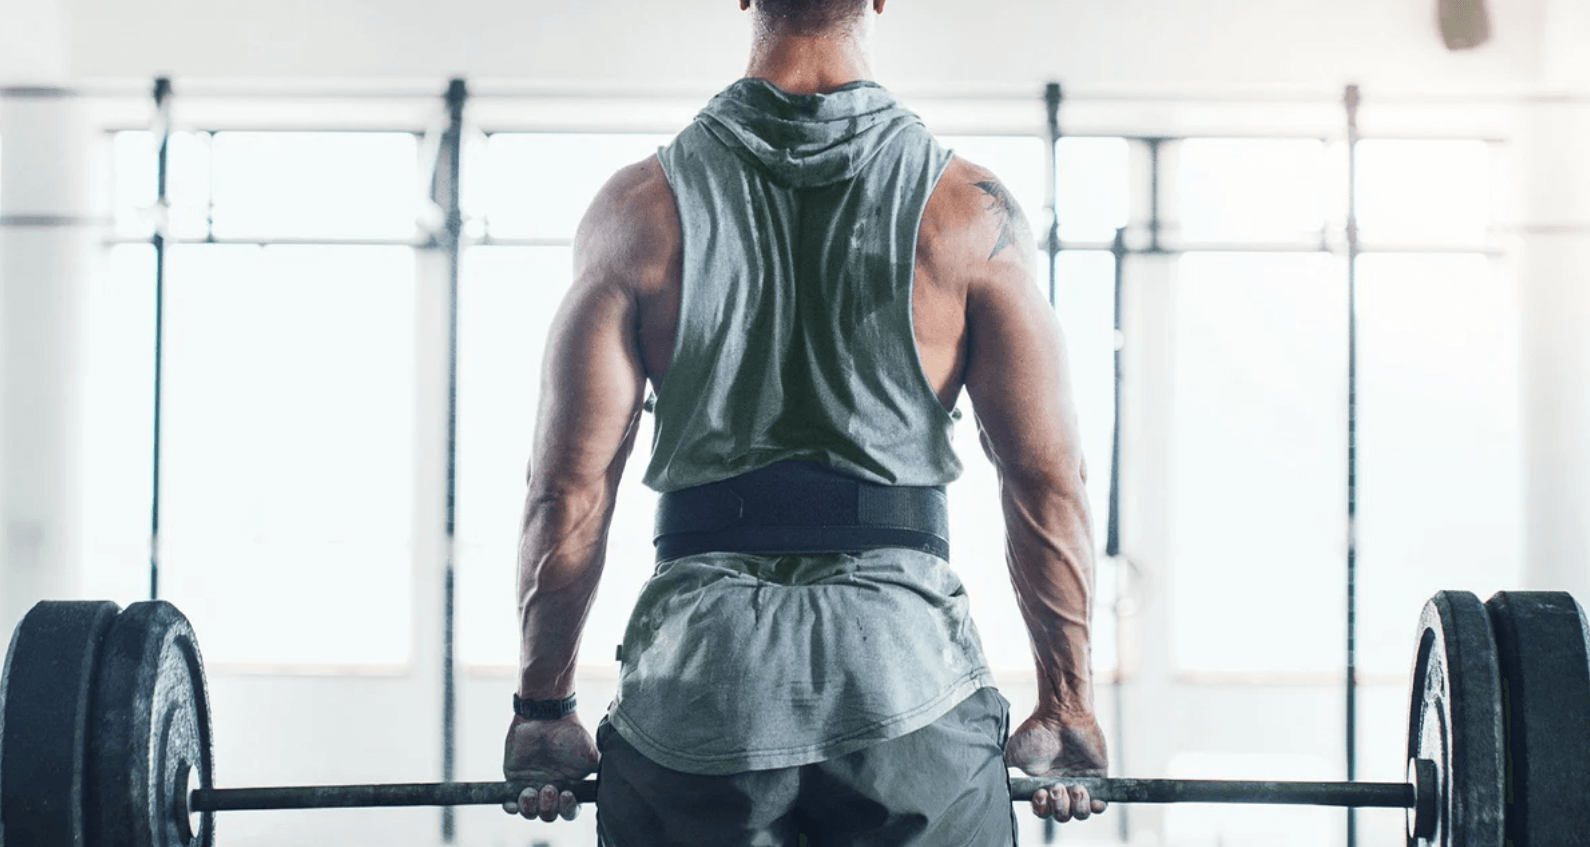 Here's how you can use a weightlifting belt when performing deadlifts